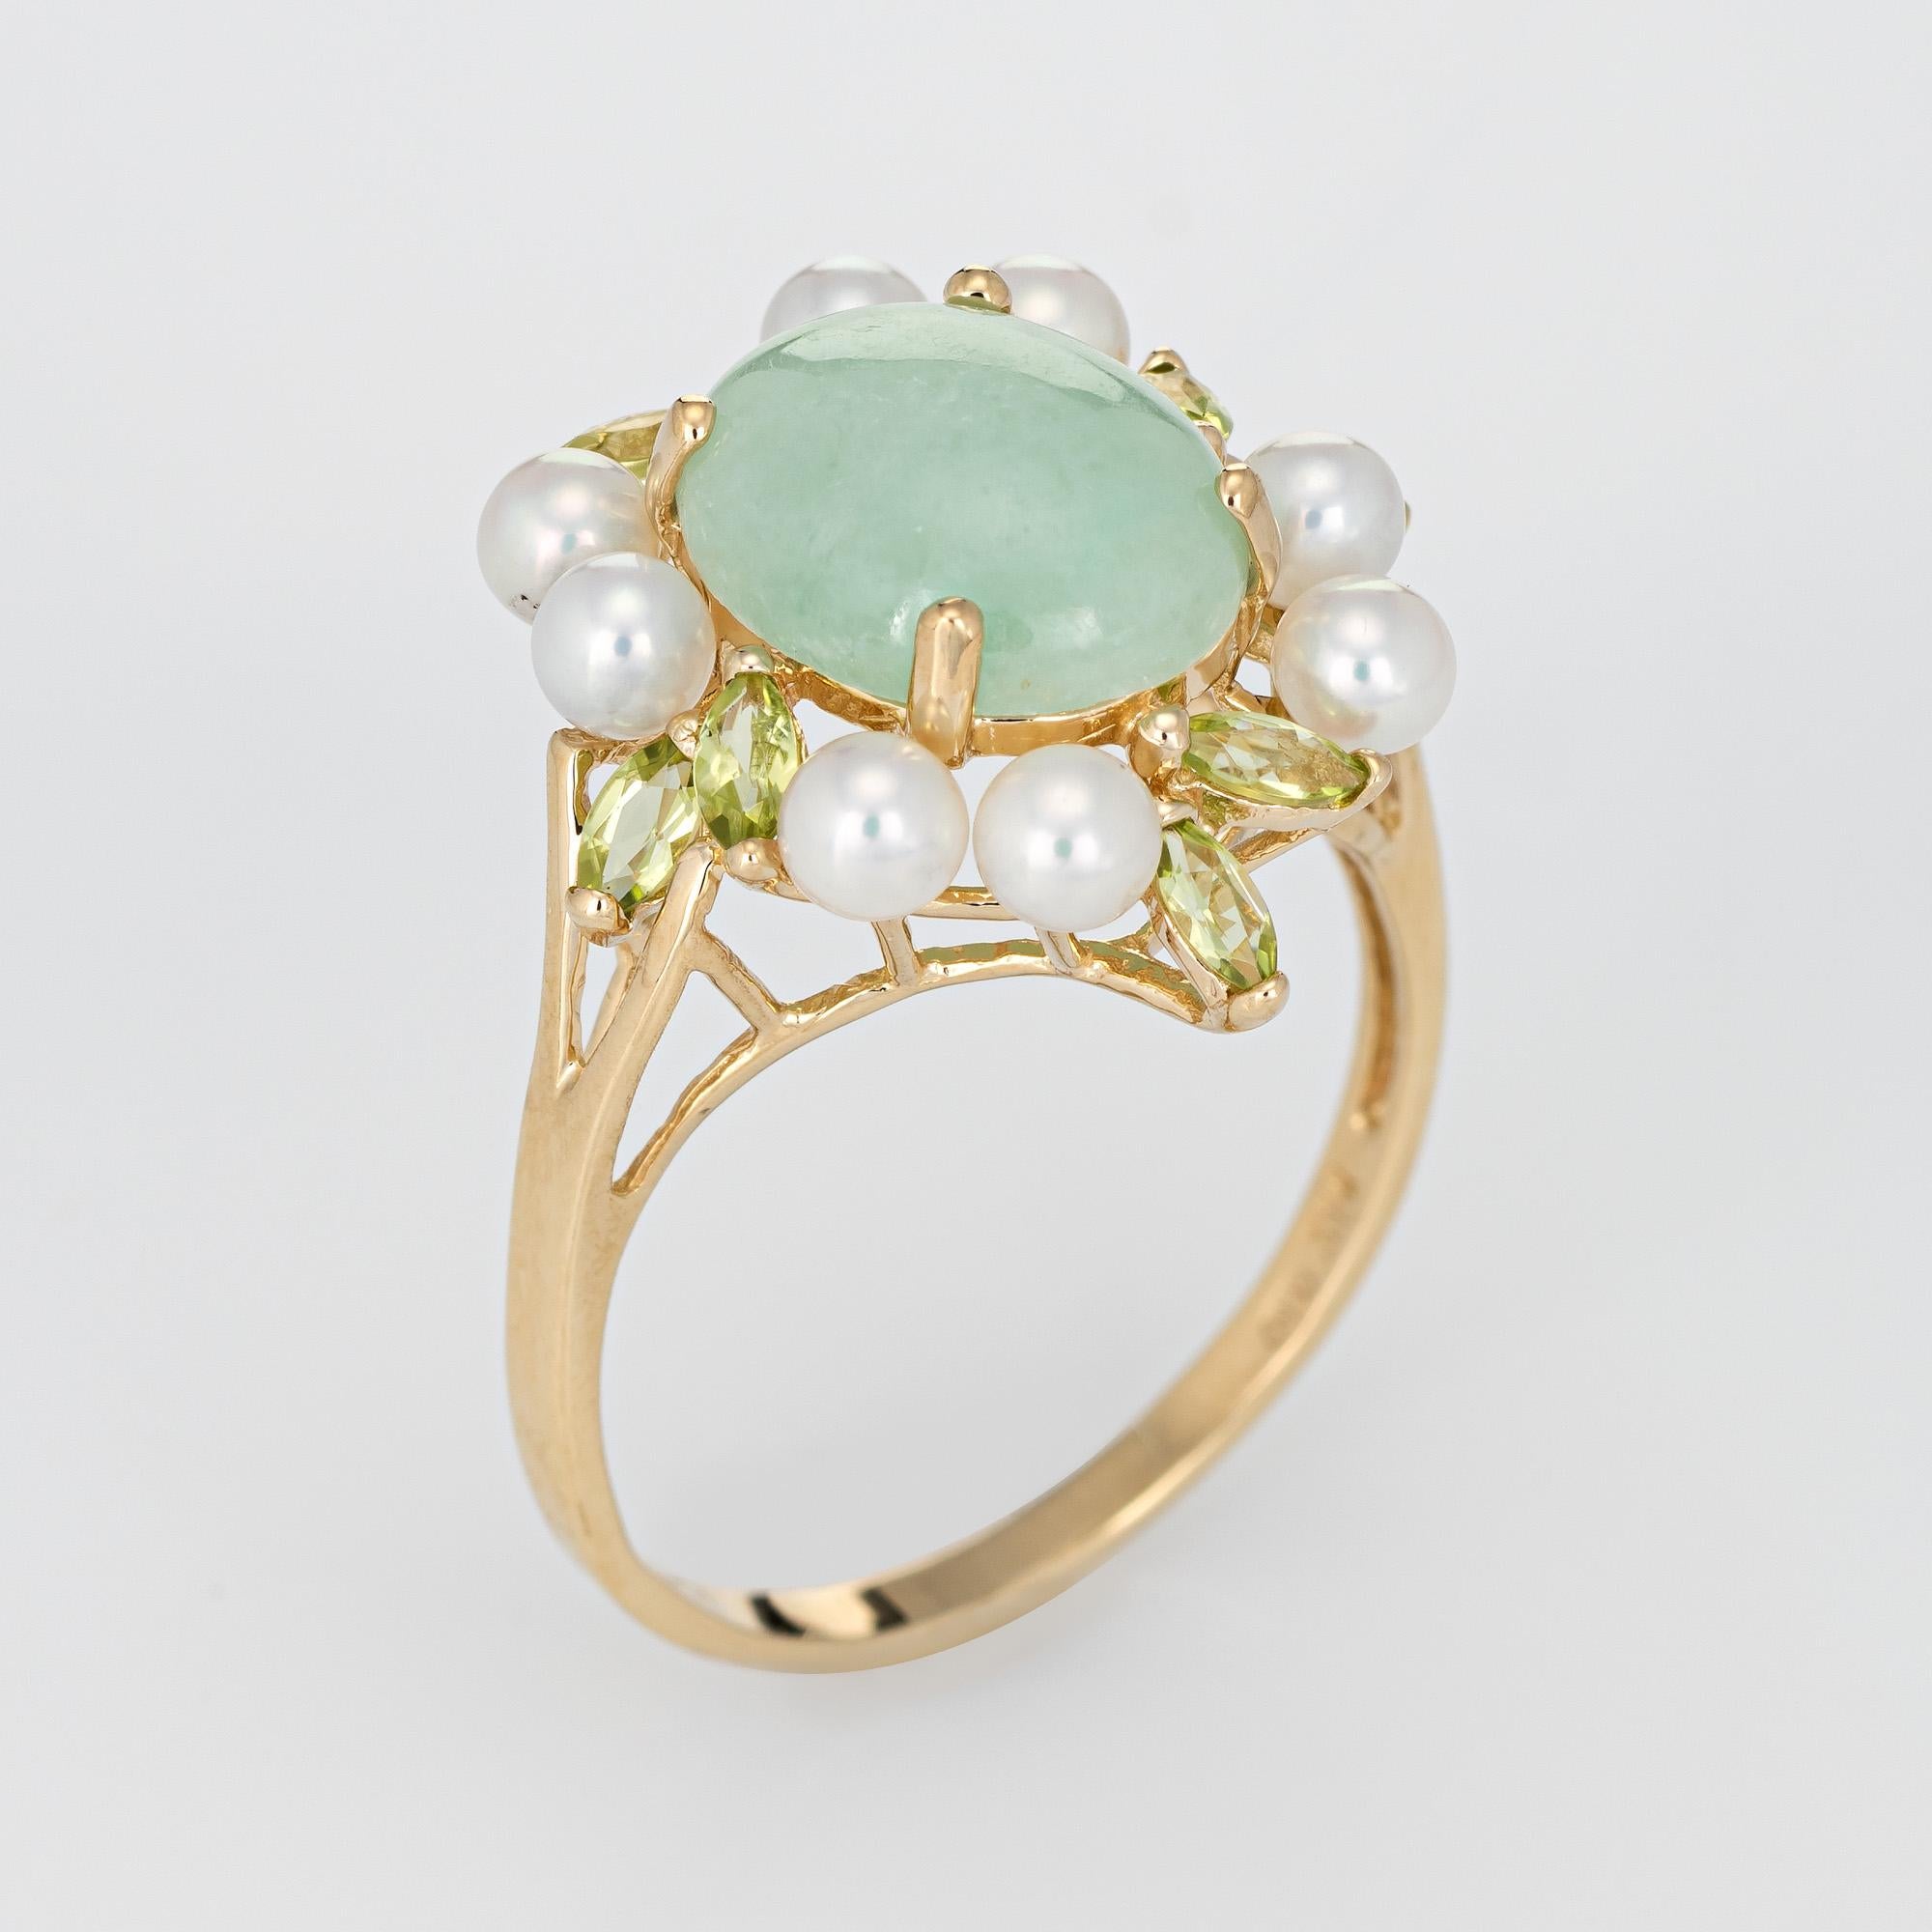 Stylish jade, peridot and cultured pearl cocktail ring crafted in 14 karat yellow gold. 

Cabochon cut jade measures 12mm x 10mm (estimated at 7 carats), accented with an estimated 0.80 carats of peridot. The cultured pearls measures 4mm each. The